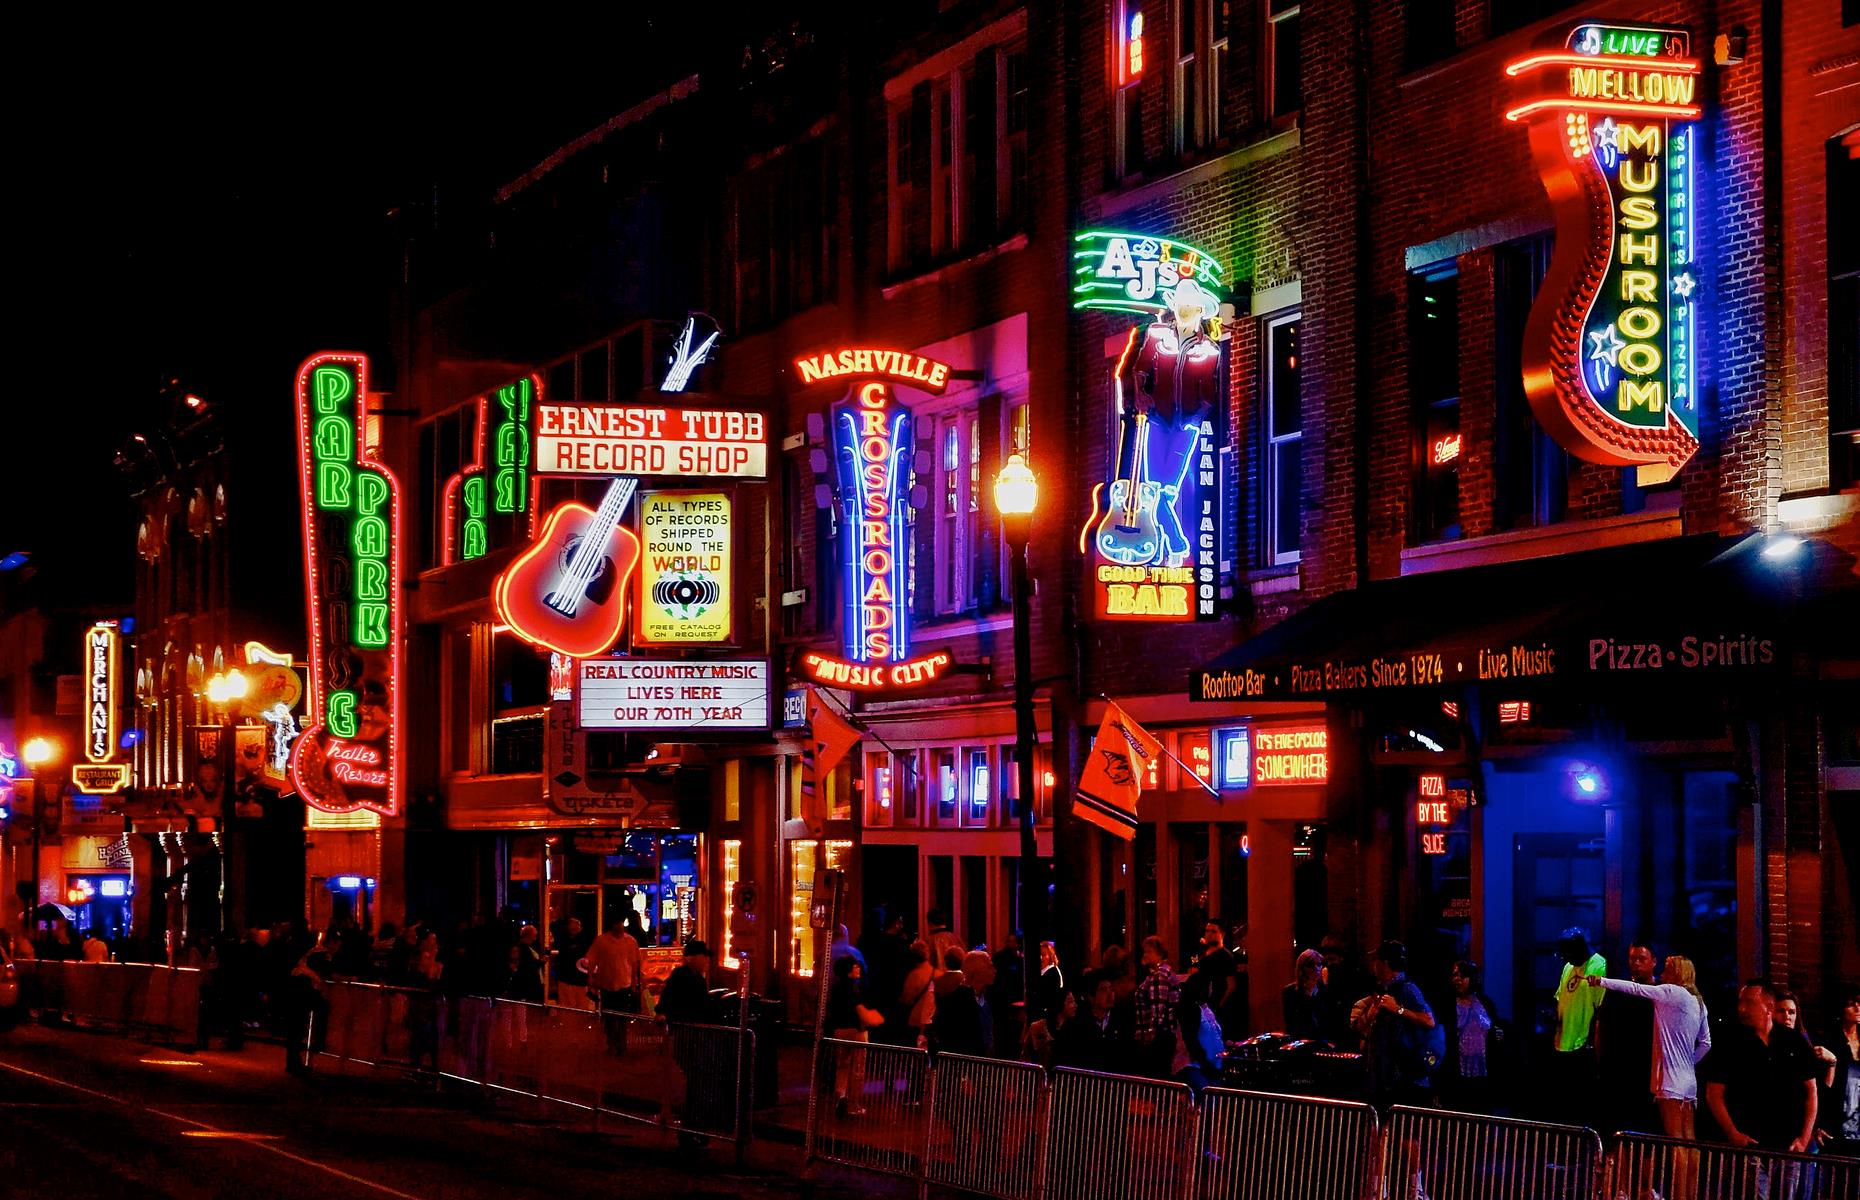 <p>Pull on your cowboy boots and button up your checked shirt – Nashville’s famous Music Row (a stretch of Broadway) is the place to be more than a little bit country. Weaving in and out of the honky-tonks along the road is as much a must as catching a performance at the <a href="https://www.opry.com/">Grand Ole Opry</a>. Most bars have musicians performing pretty much all night long, and the dancing often spills onto the sidewalks.</p>